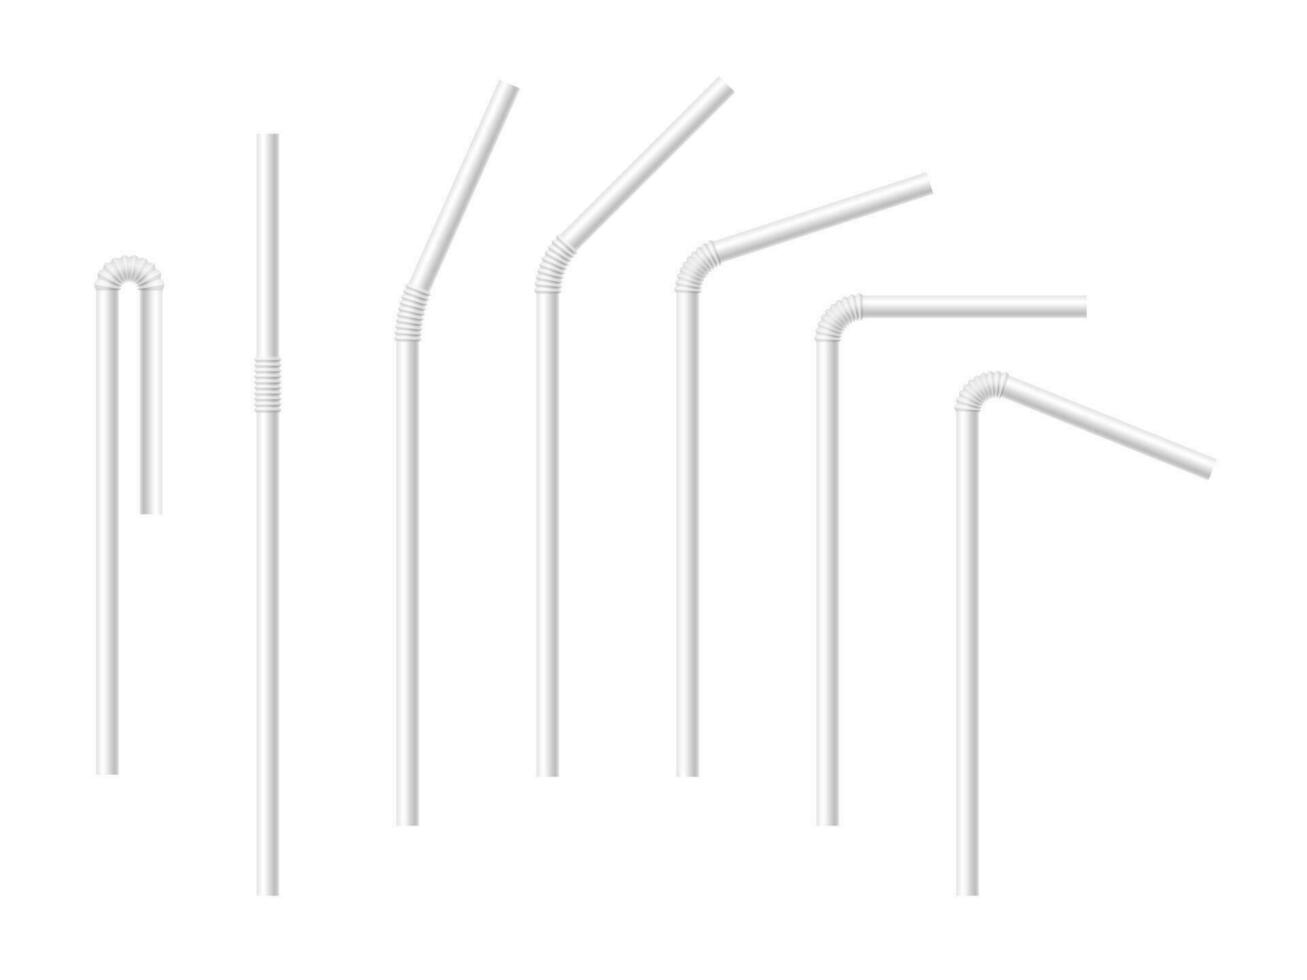 Drinking straw vector icon. Aluminum or plastic tube for drinking